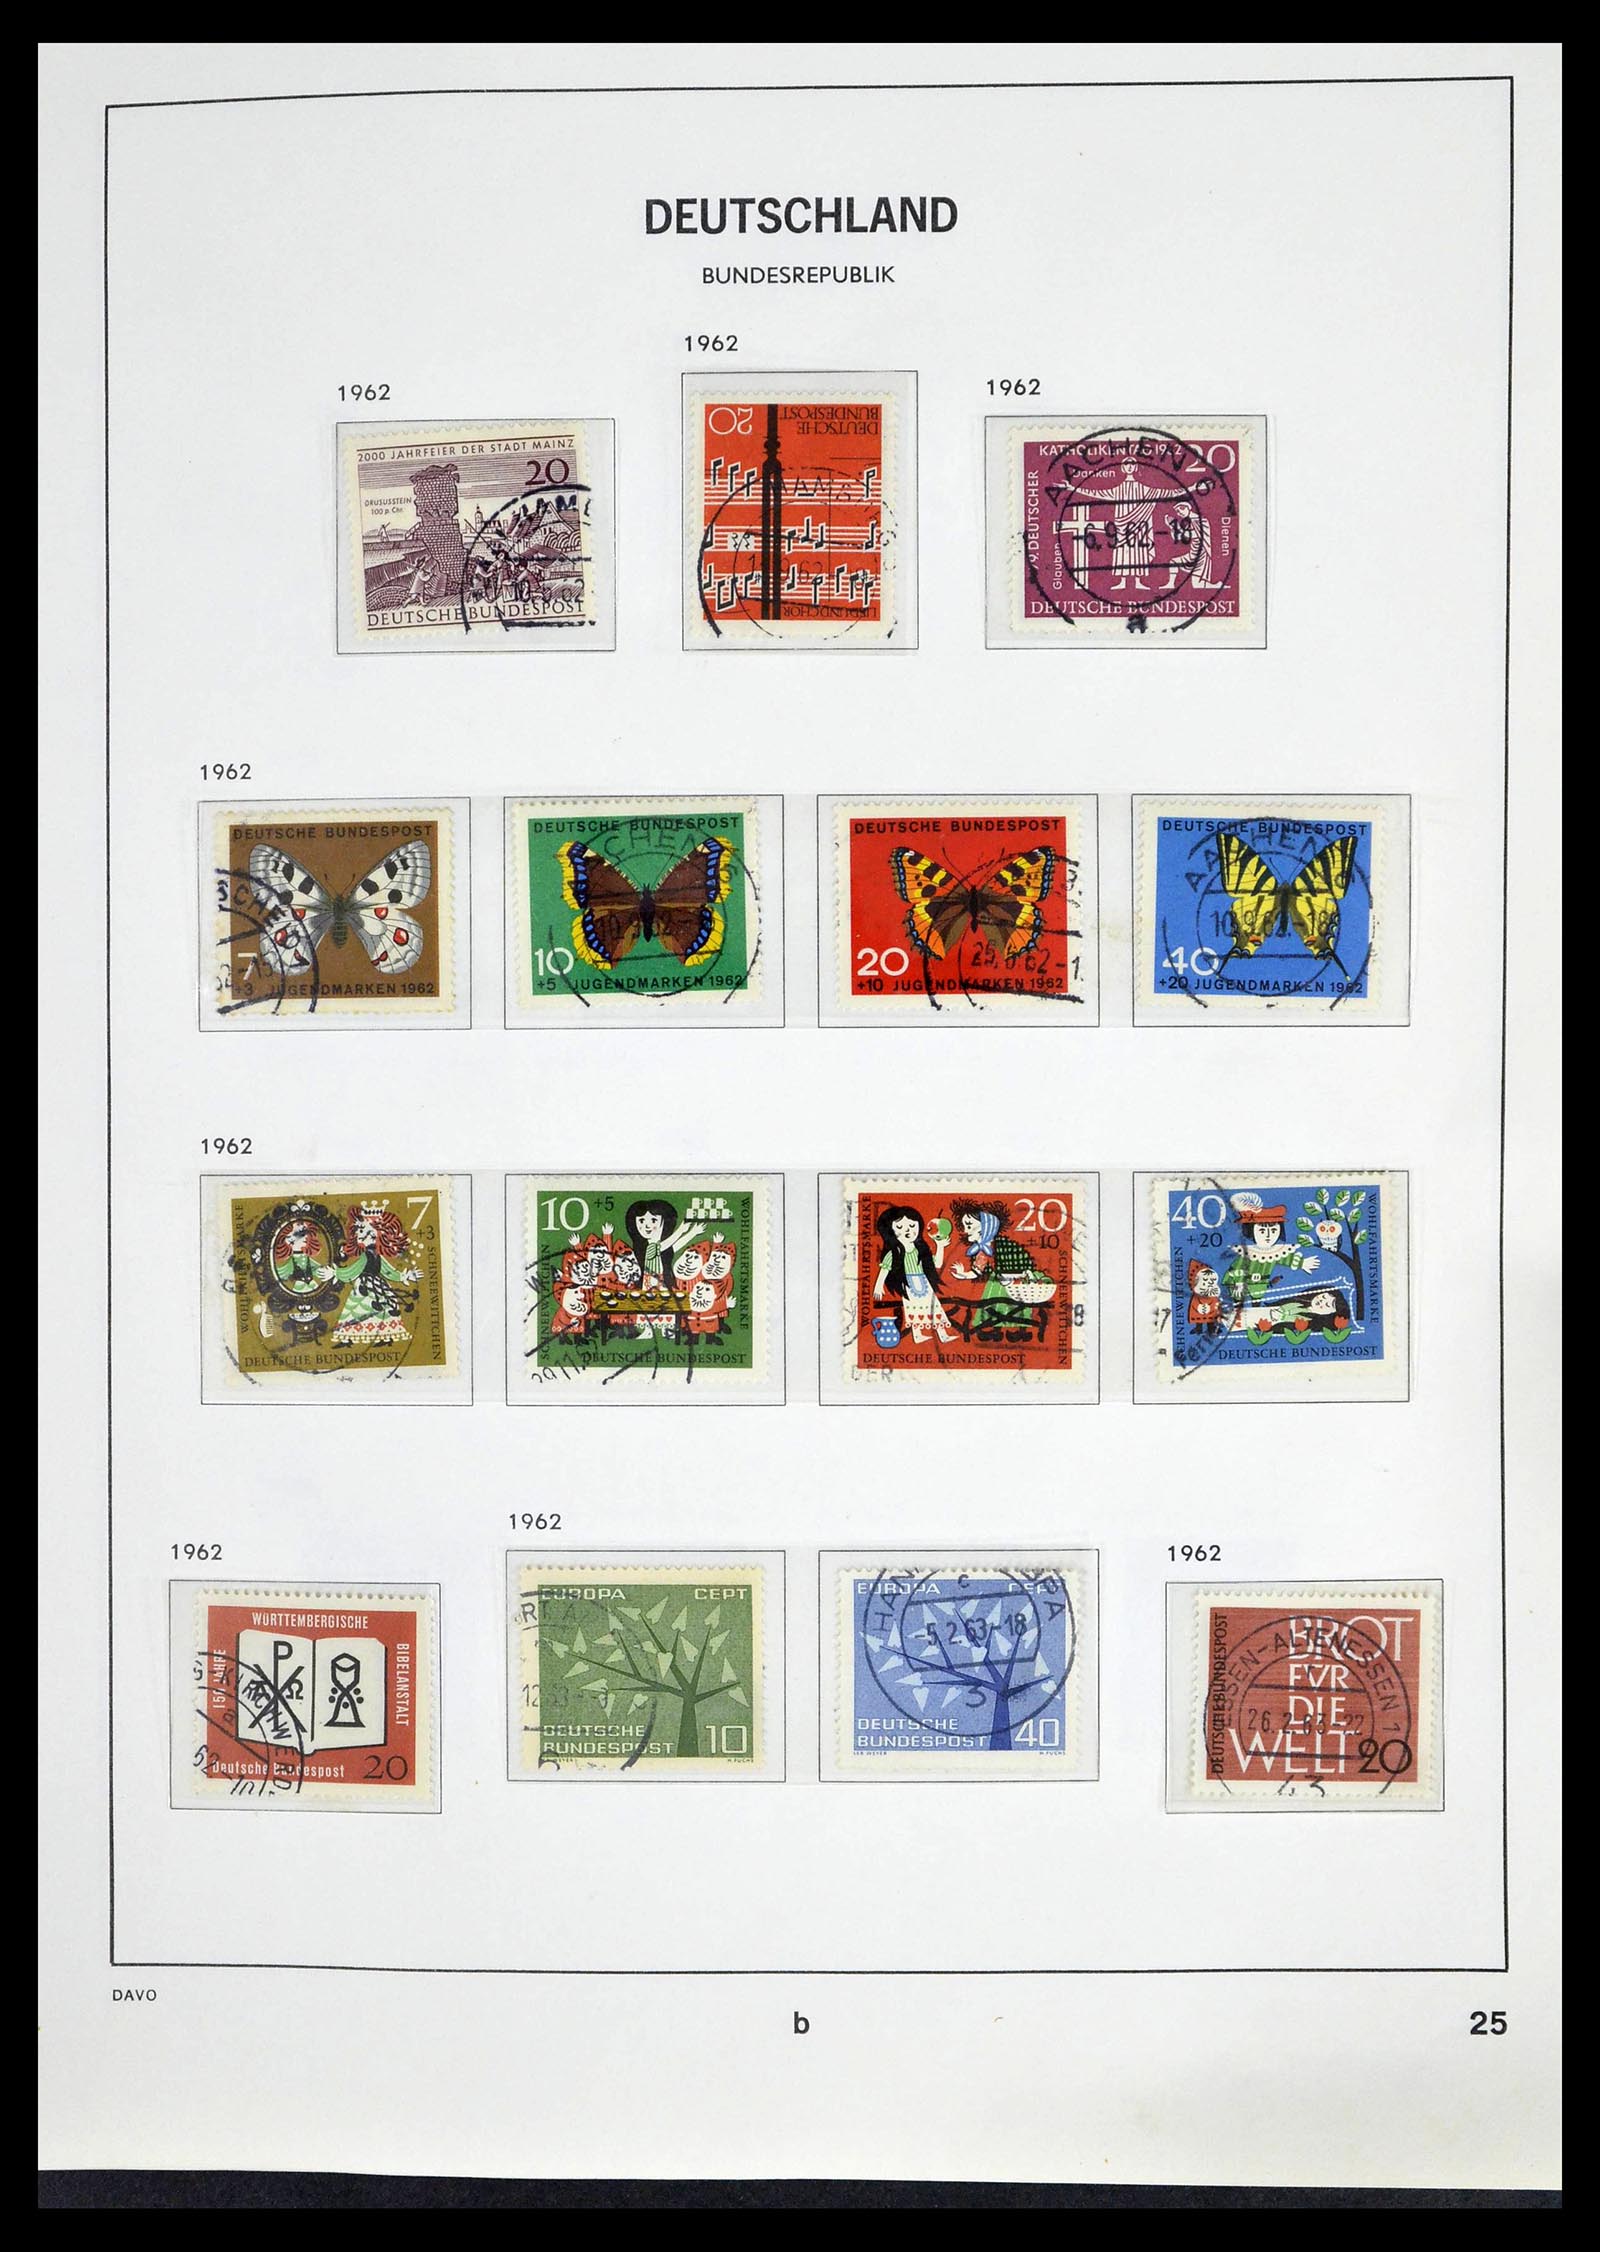 39326 0020 - Stamp collection 39326 Bundespost 1949-2003.